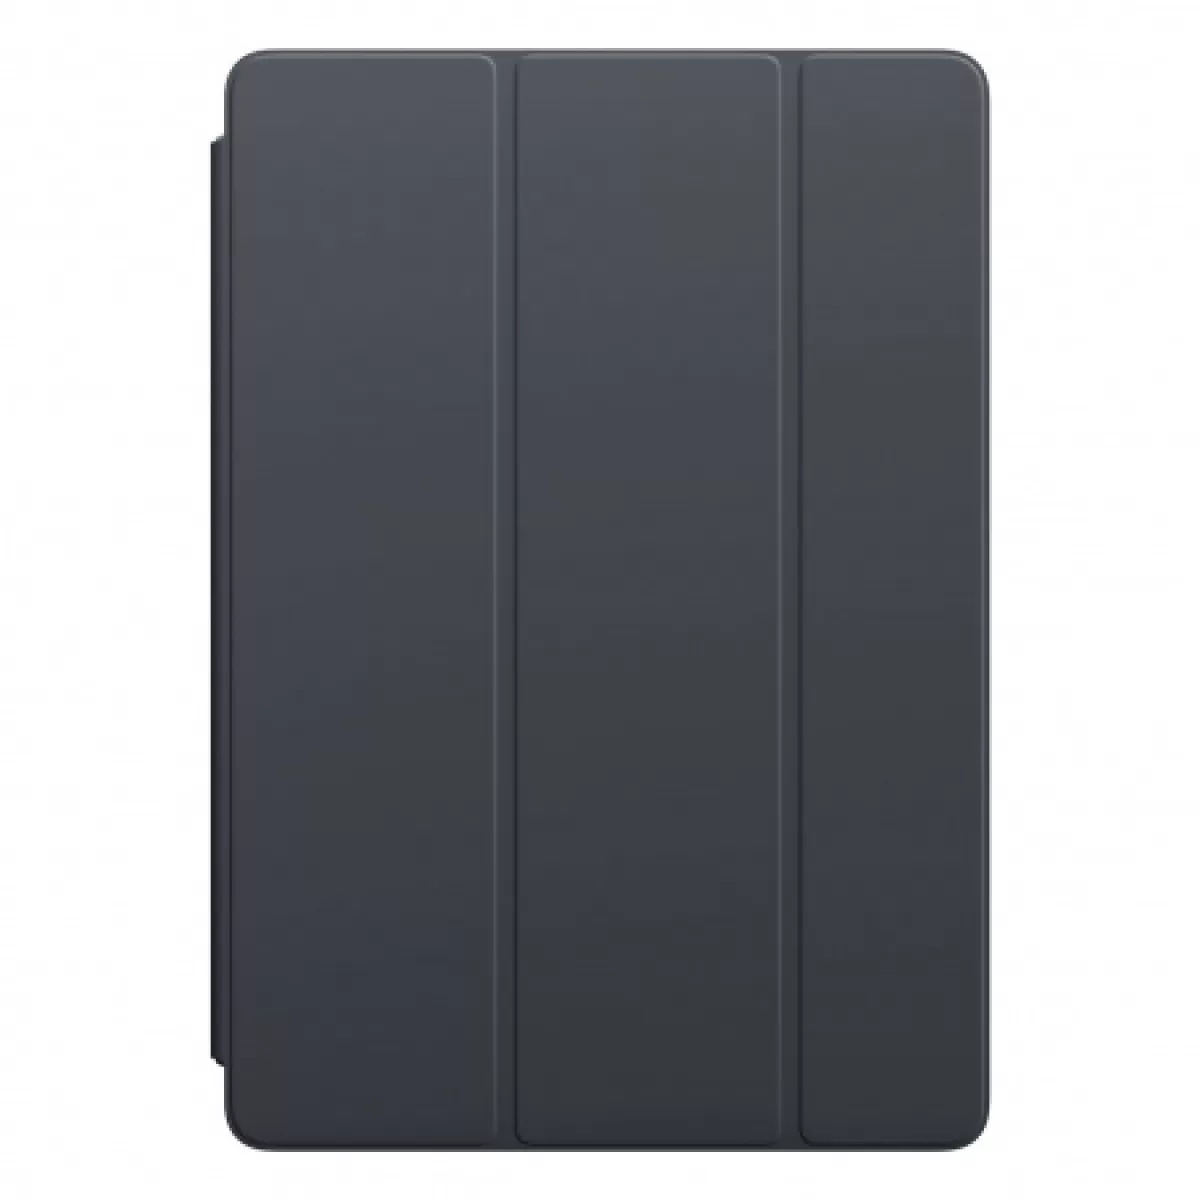 Apple Smart Cover for 10.5inch iPad Pro Charcoal Gray